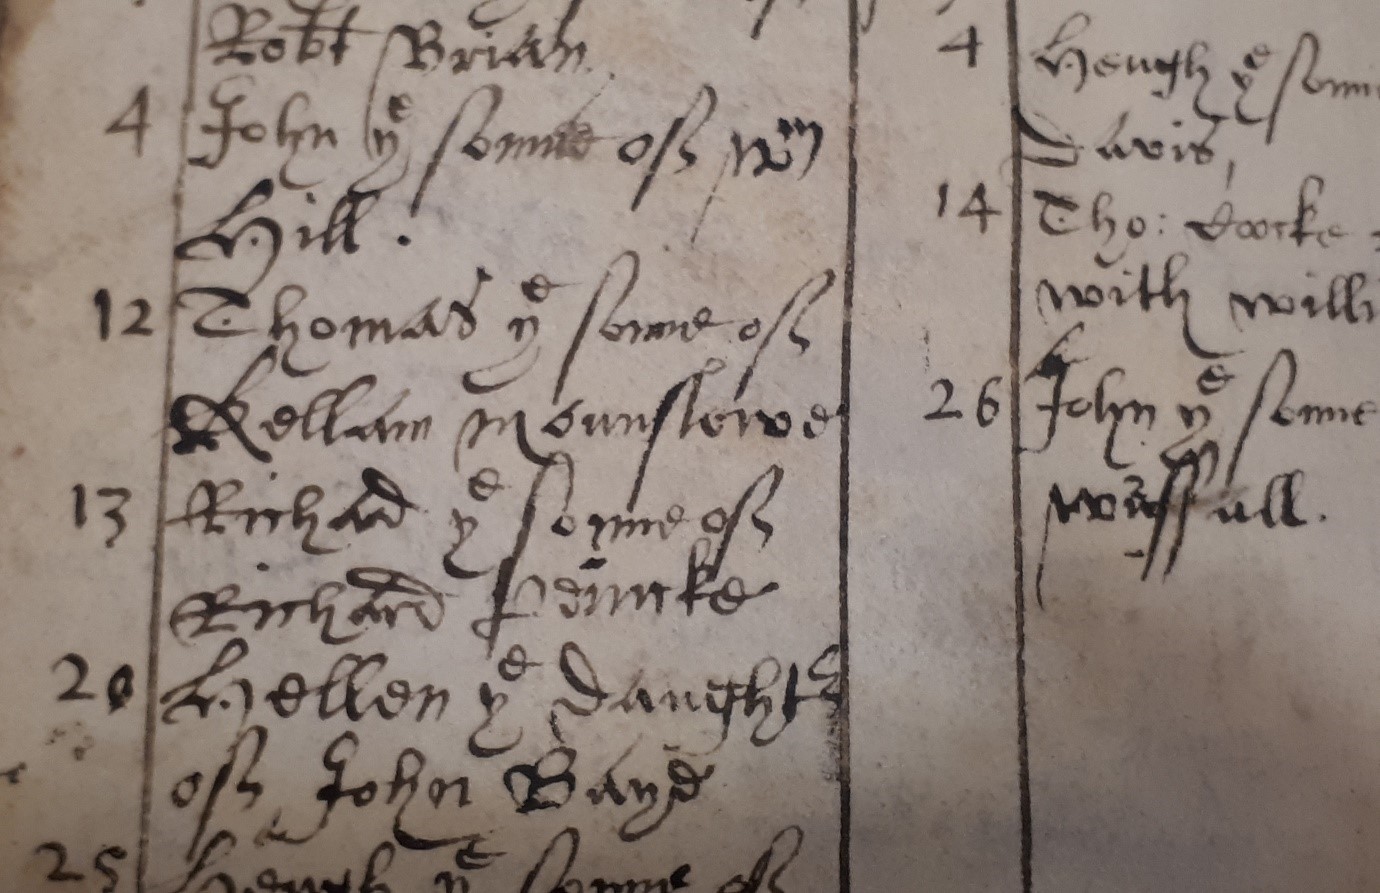 Baptism entry for Thomas Winslow, Son of Kenelm Winslow July 12th, 1575, Worcester St. Andrew & All Saints Ref: b850 BA2333.46 Vol 1 © WAAS